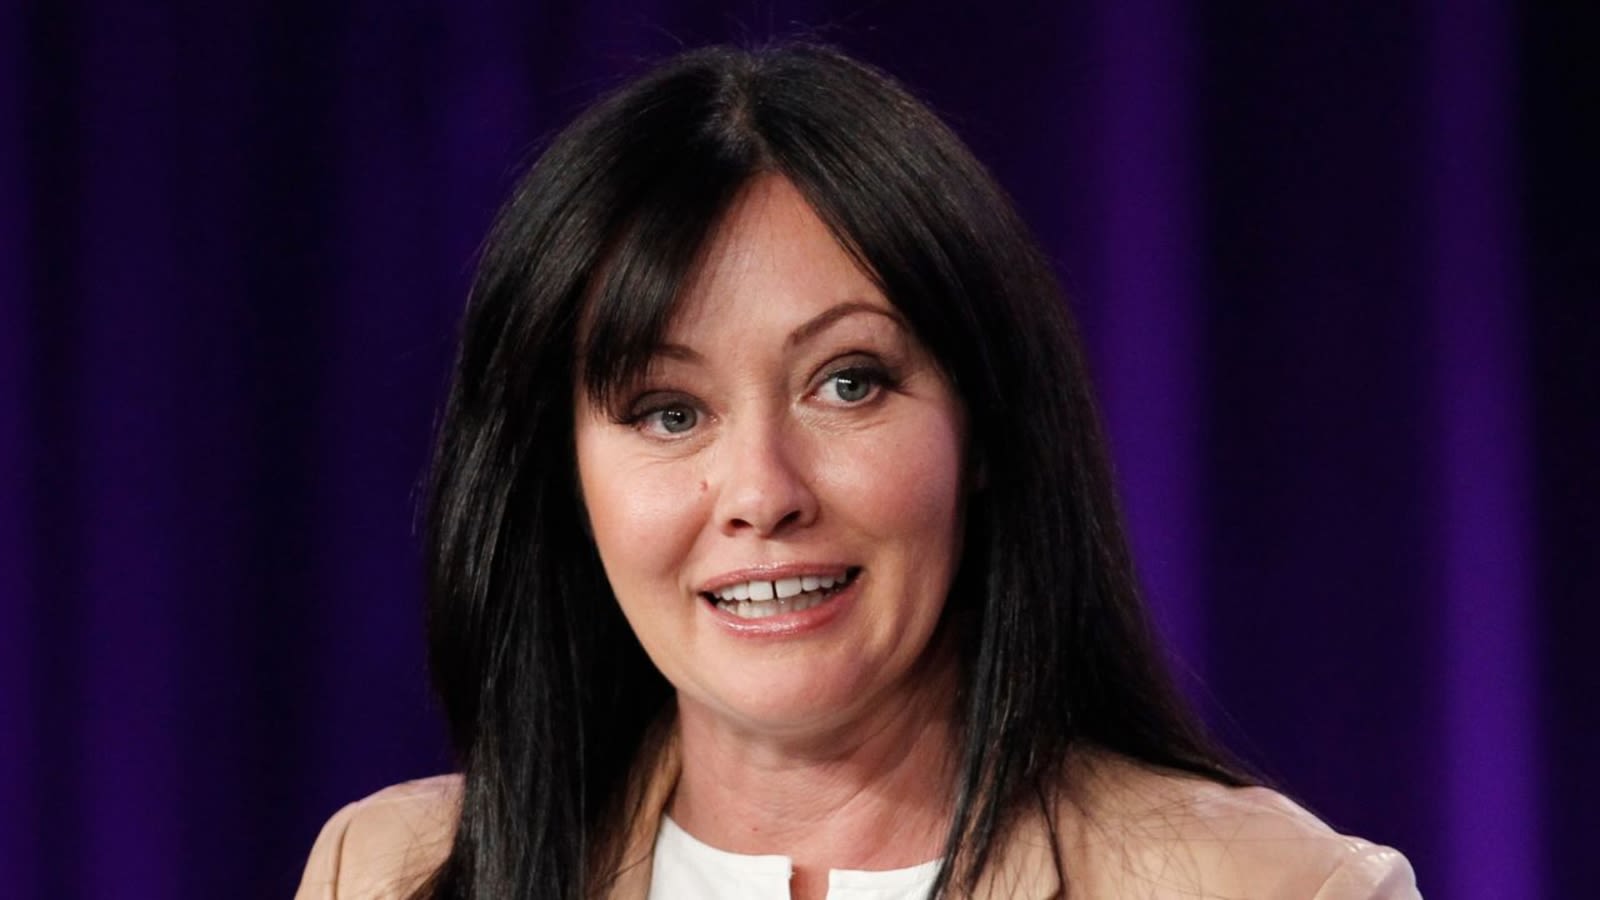 Shannen Doherty remembered: Costars pay tribute to 'Beverly Hills, 90210' star after her death at 53